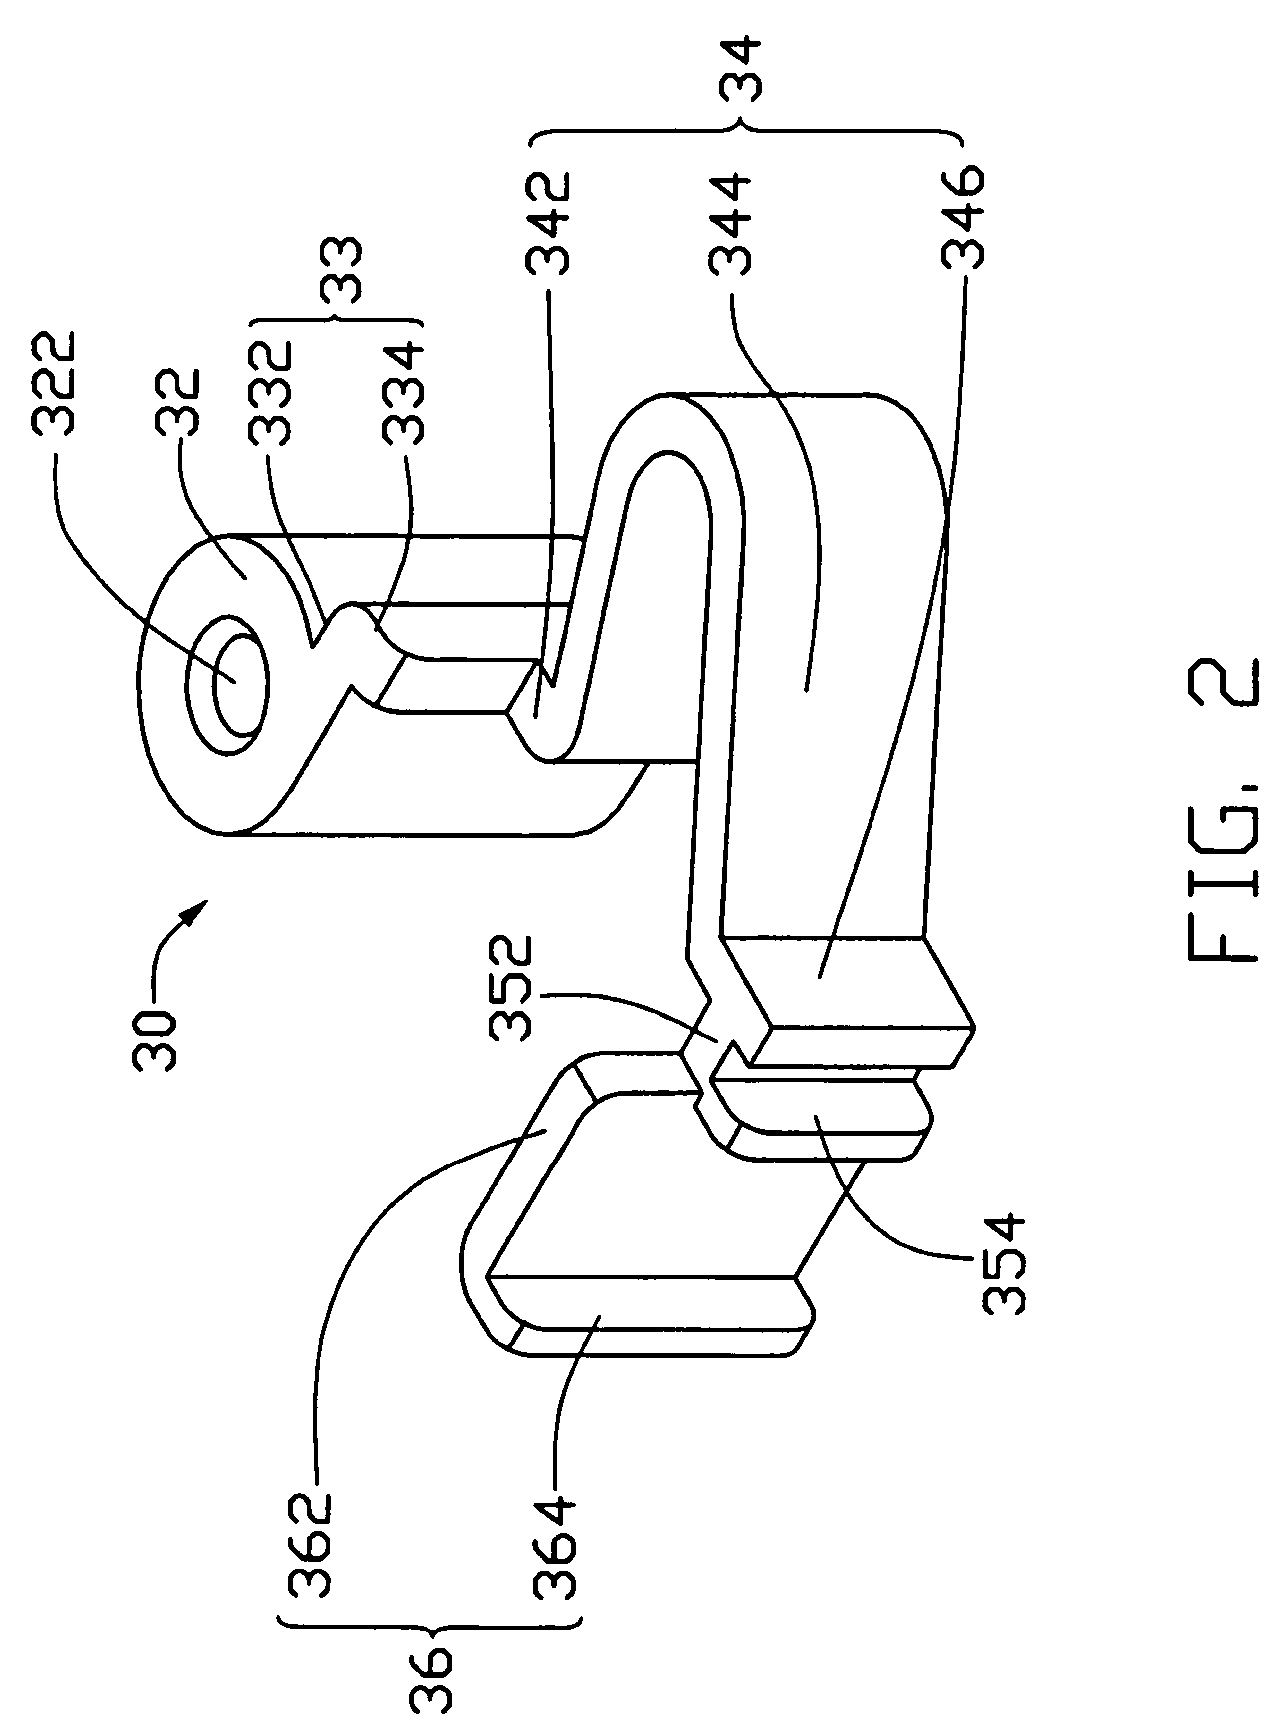 Mounting apparatus for power supply